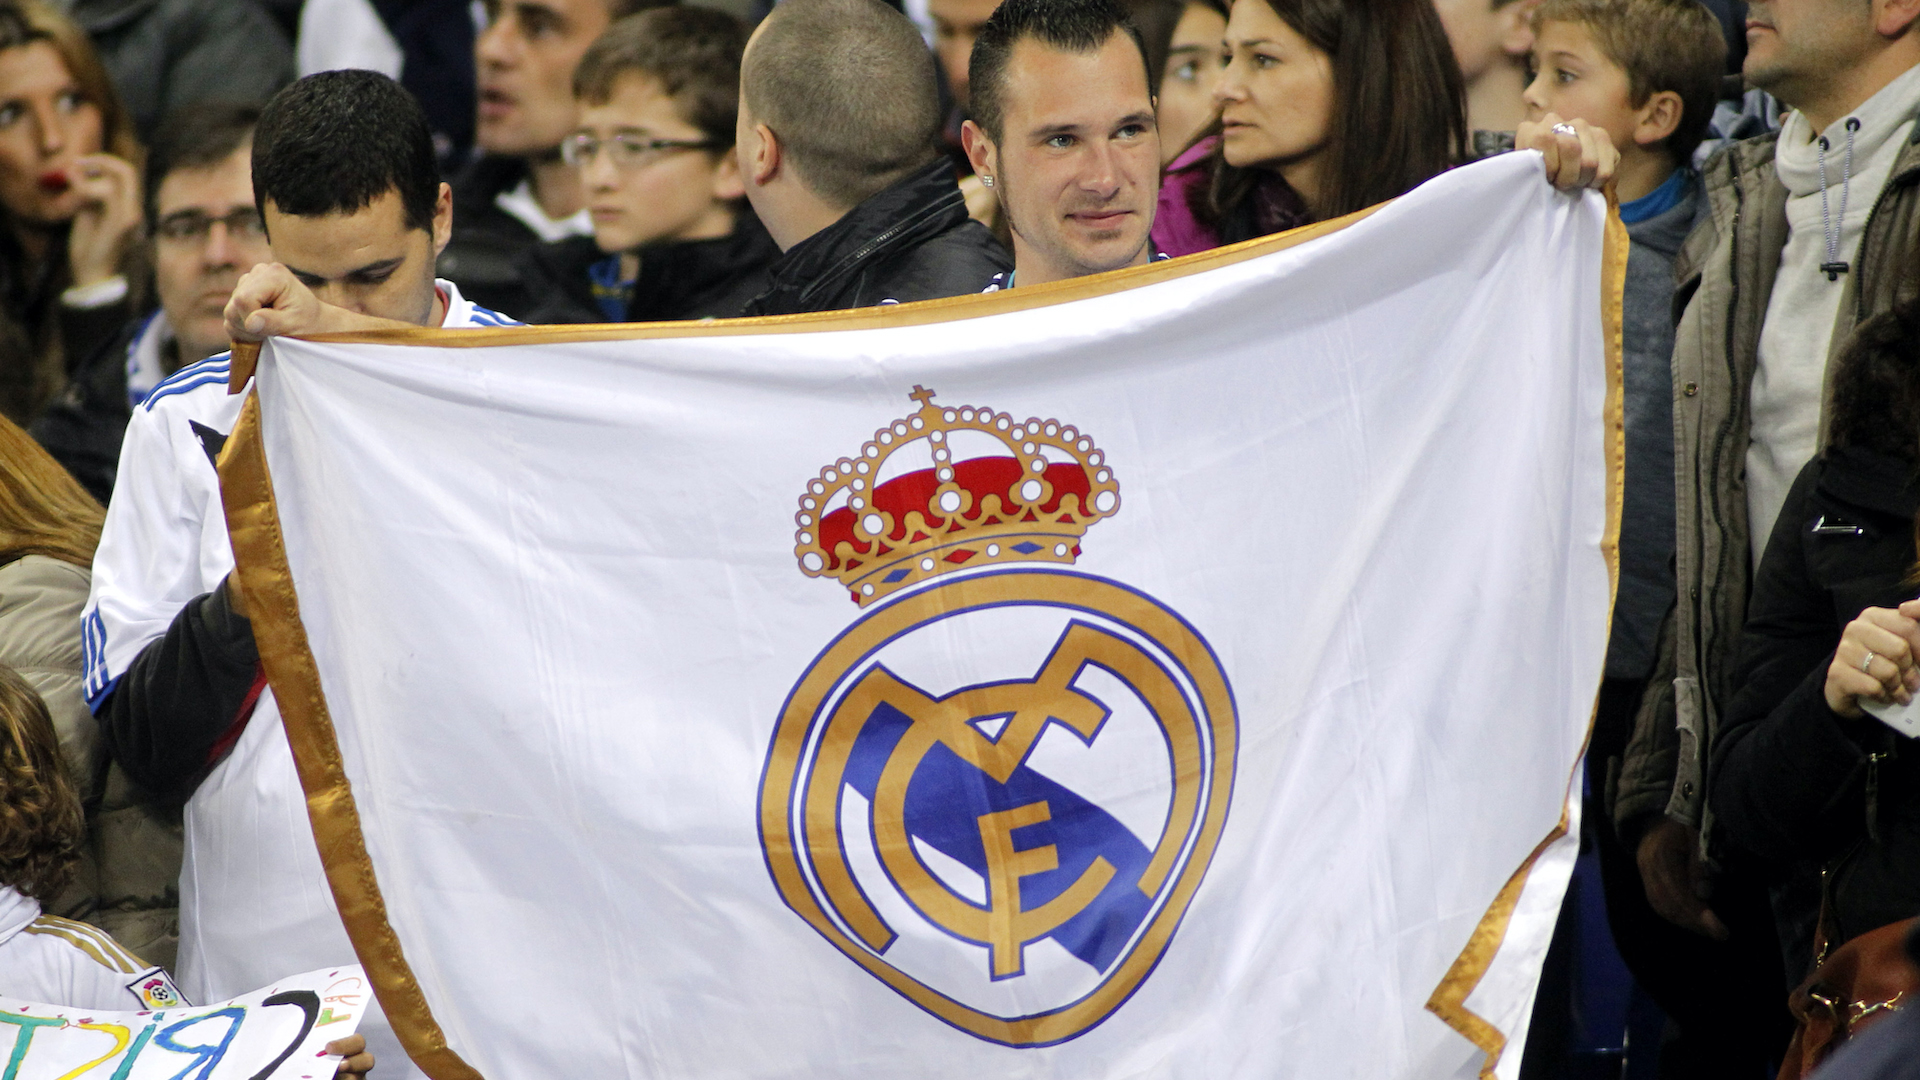 A fan holding a Real Madrid flag